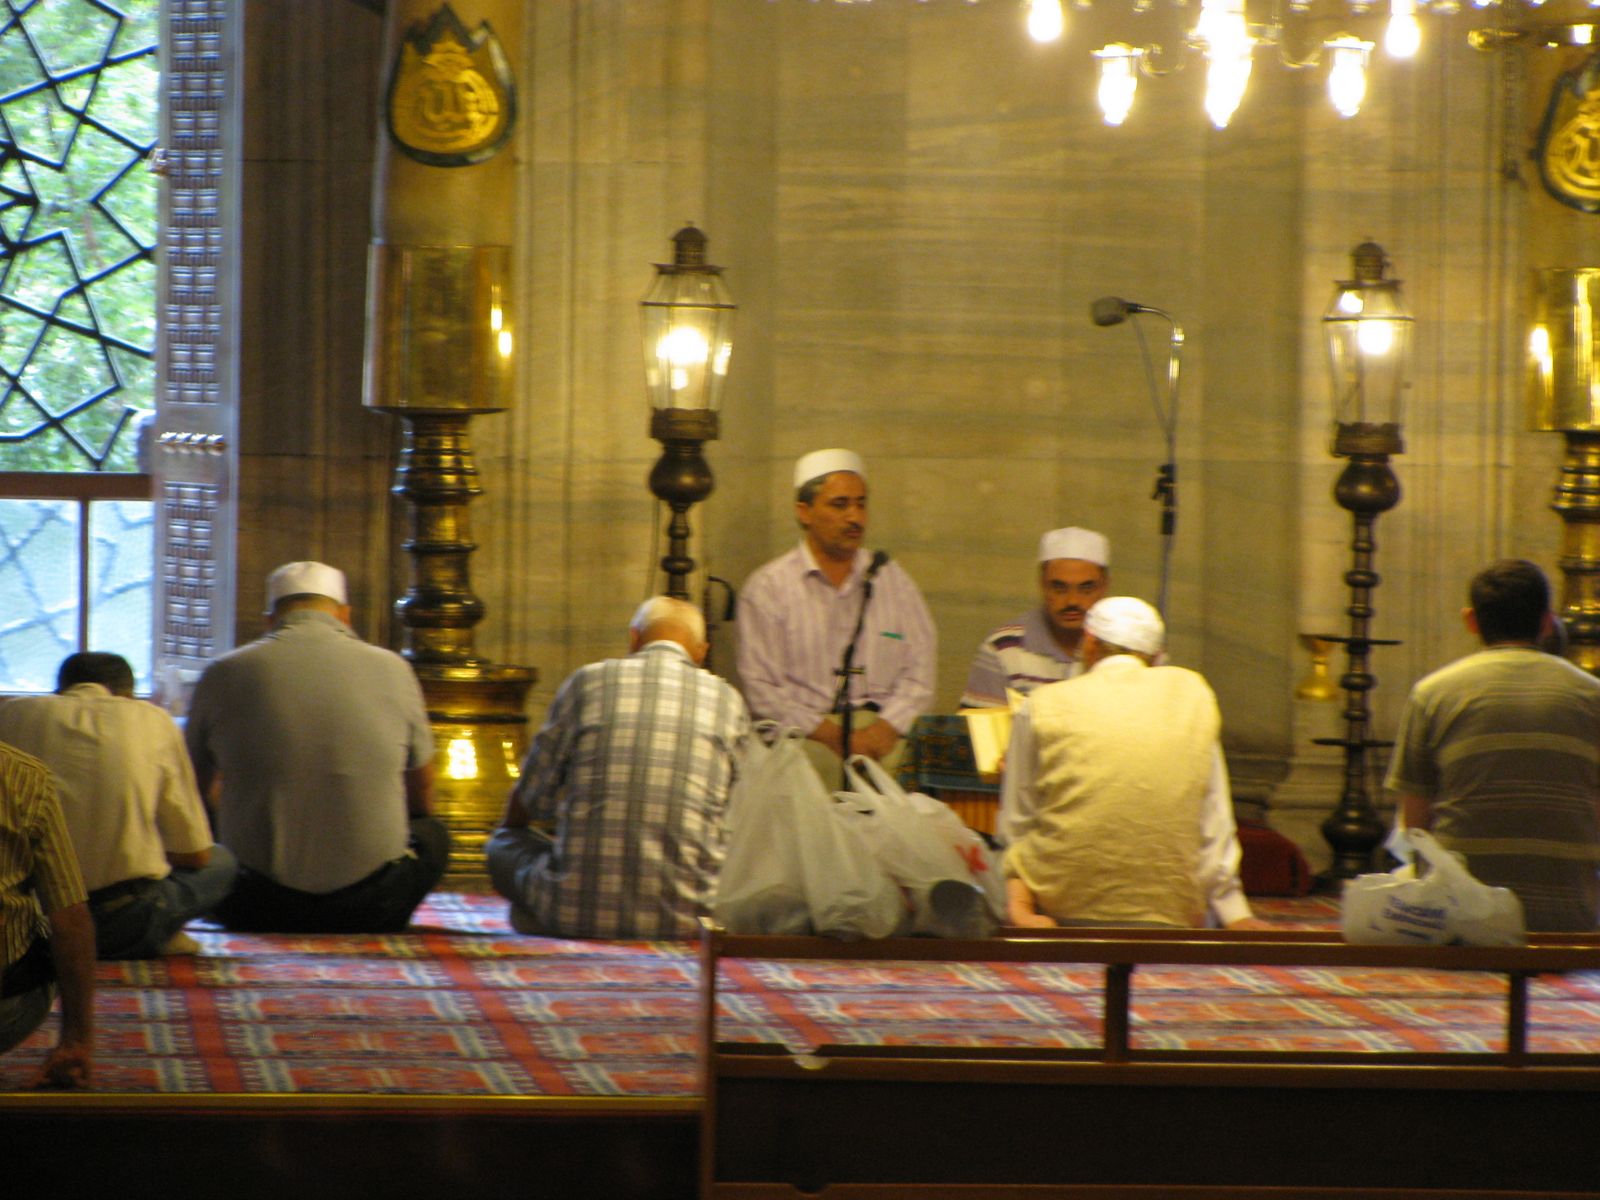 Muslims studying in a mosque